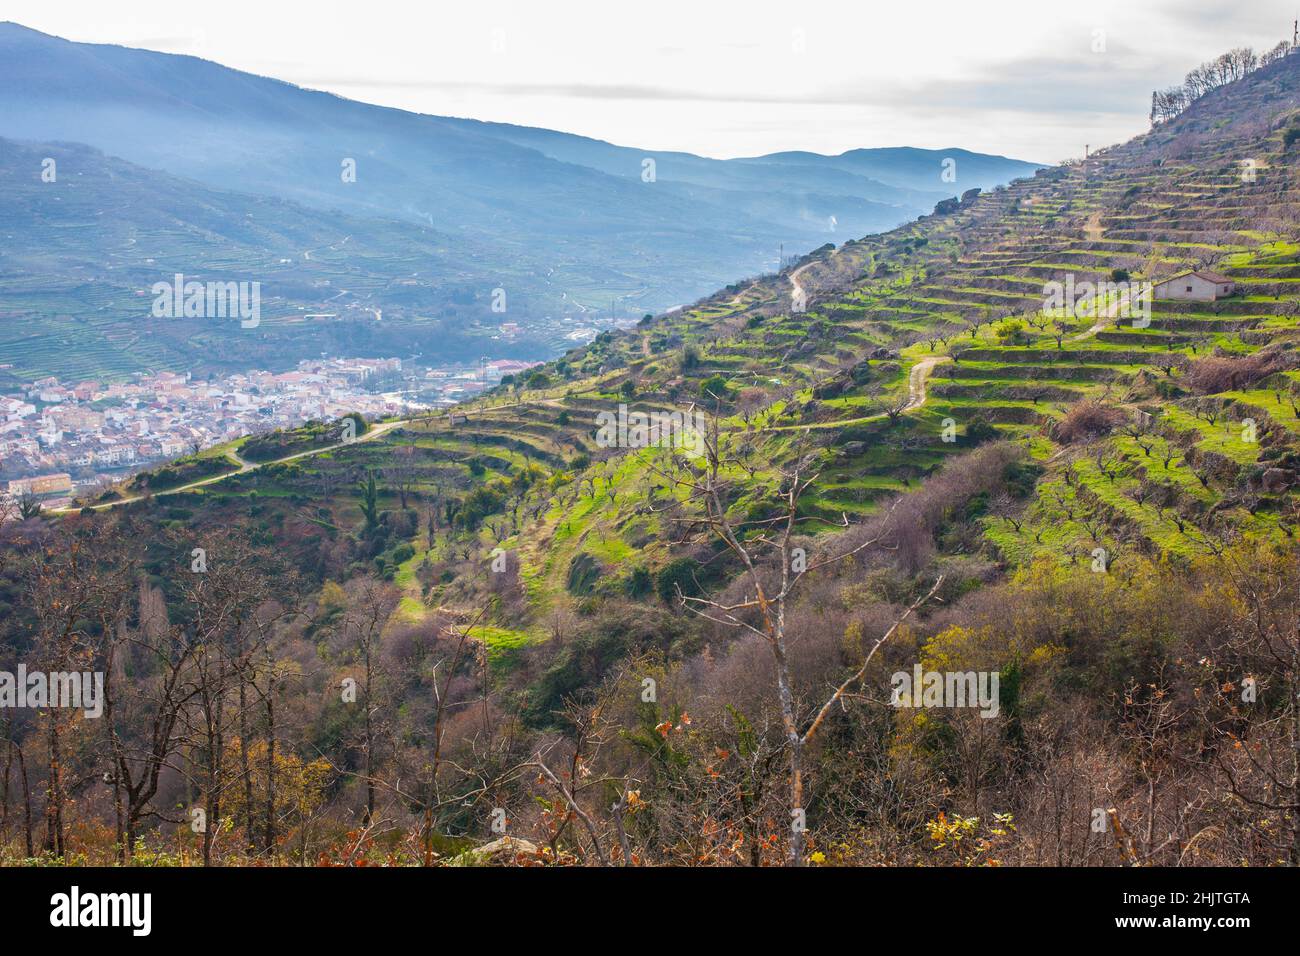 Winter scene full of cherry trees growing on terraces, Valle del Jerte, Caceres, Extremadura, Spain Stock Photo